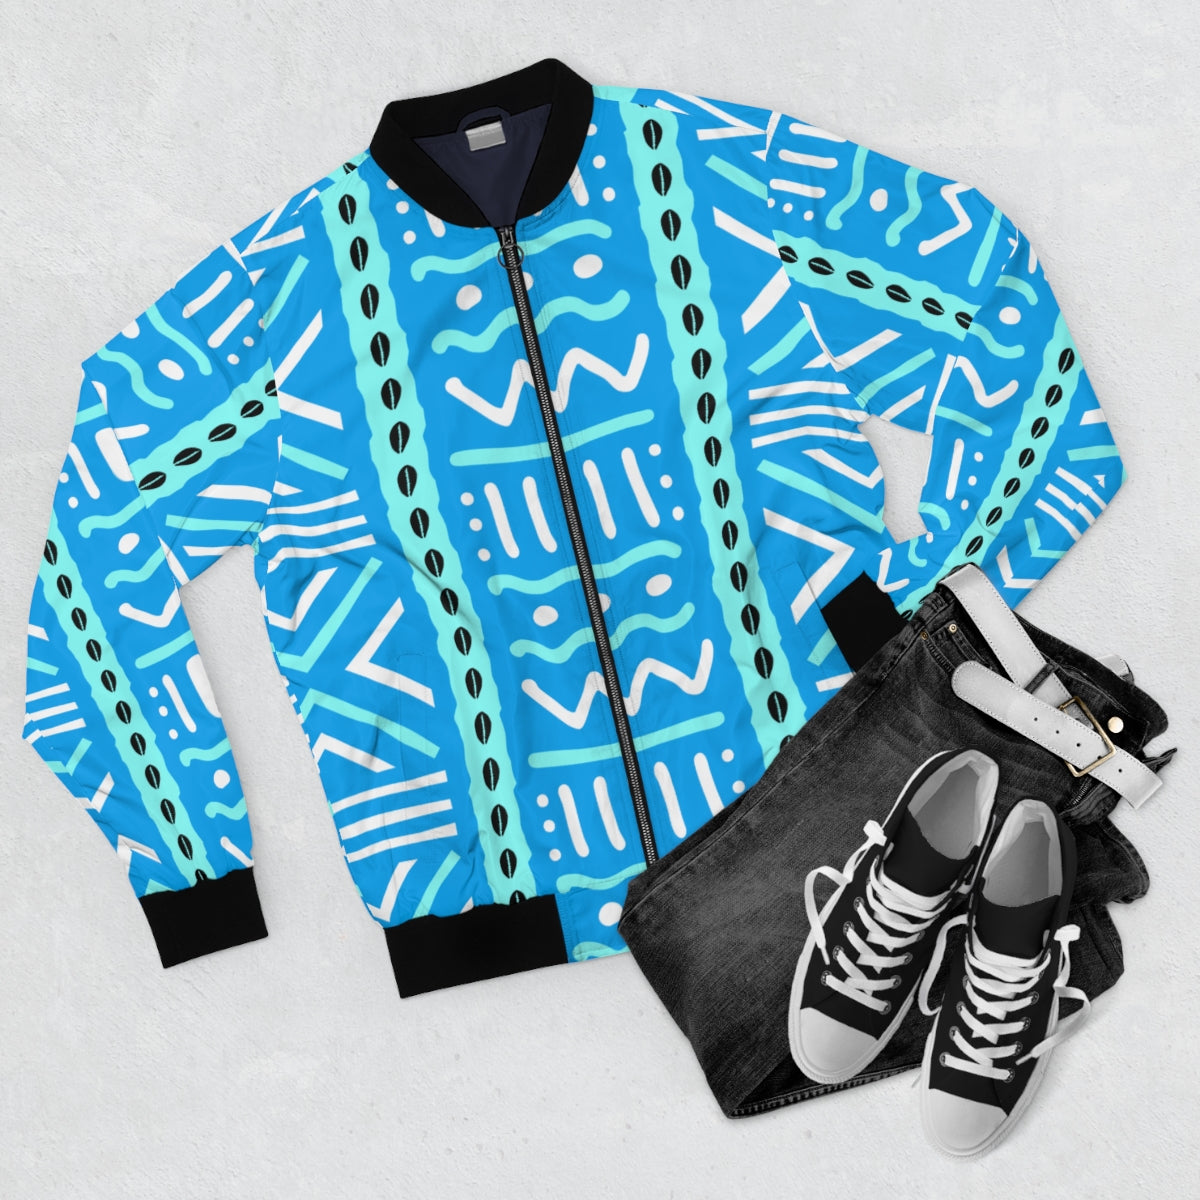 Mudcloth Blue and White Print Bomber Jacket